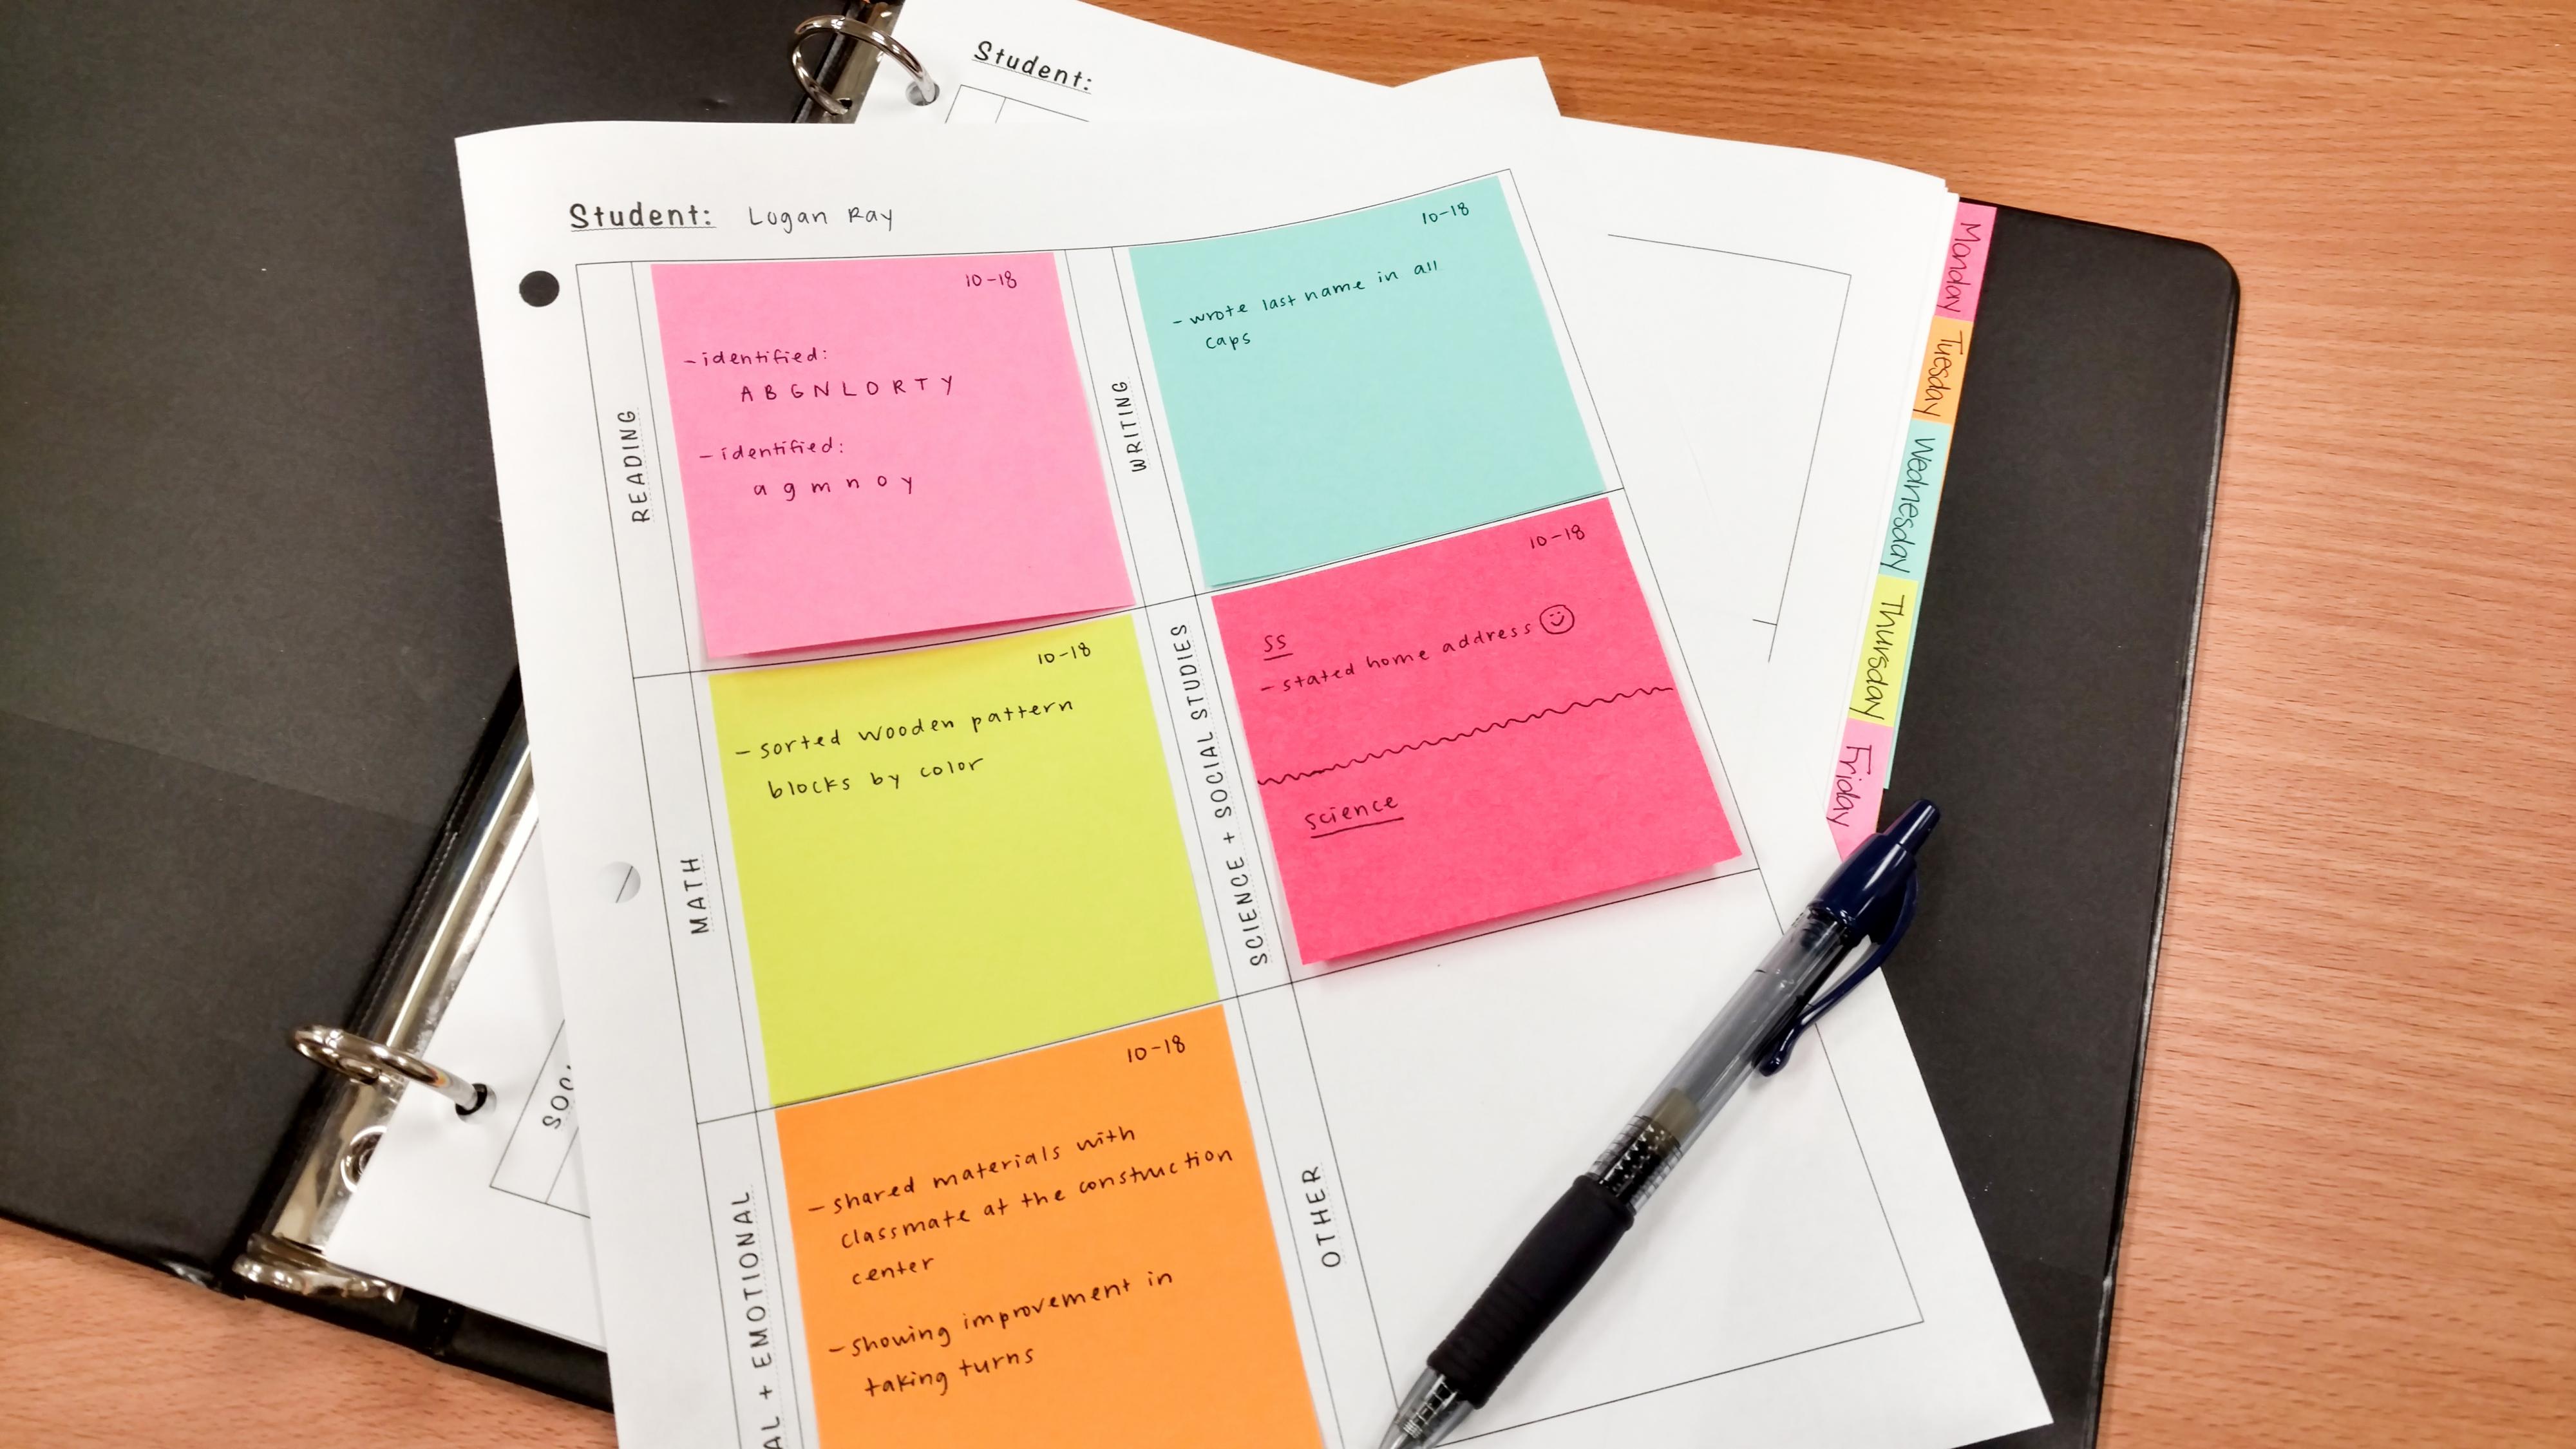 A binder with worksheets featuring written notes on post-it notes